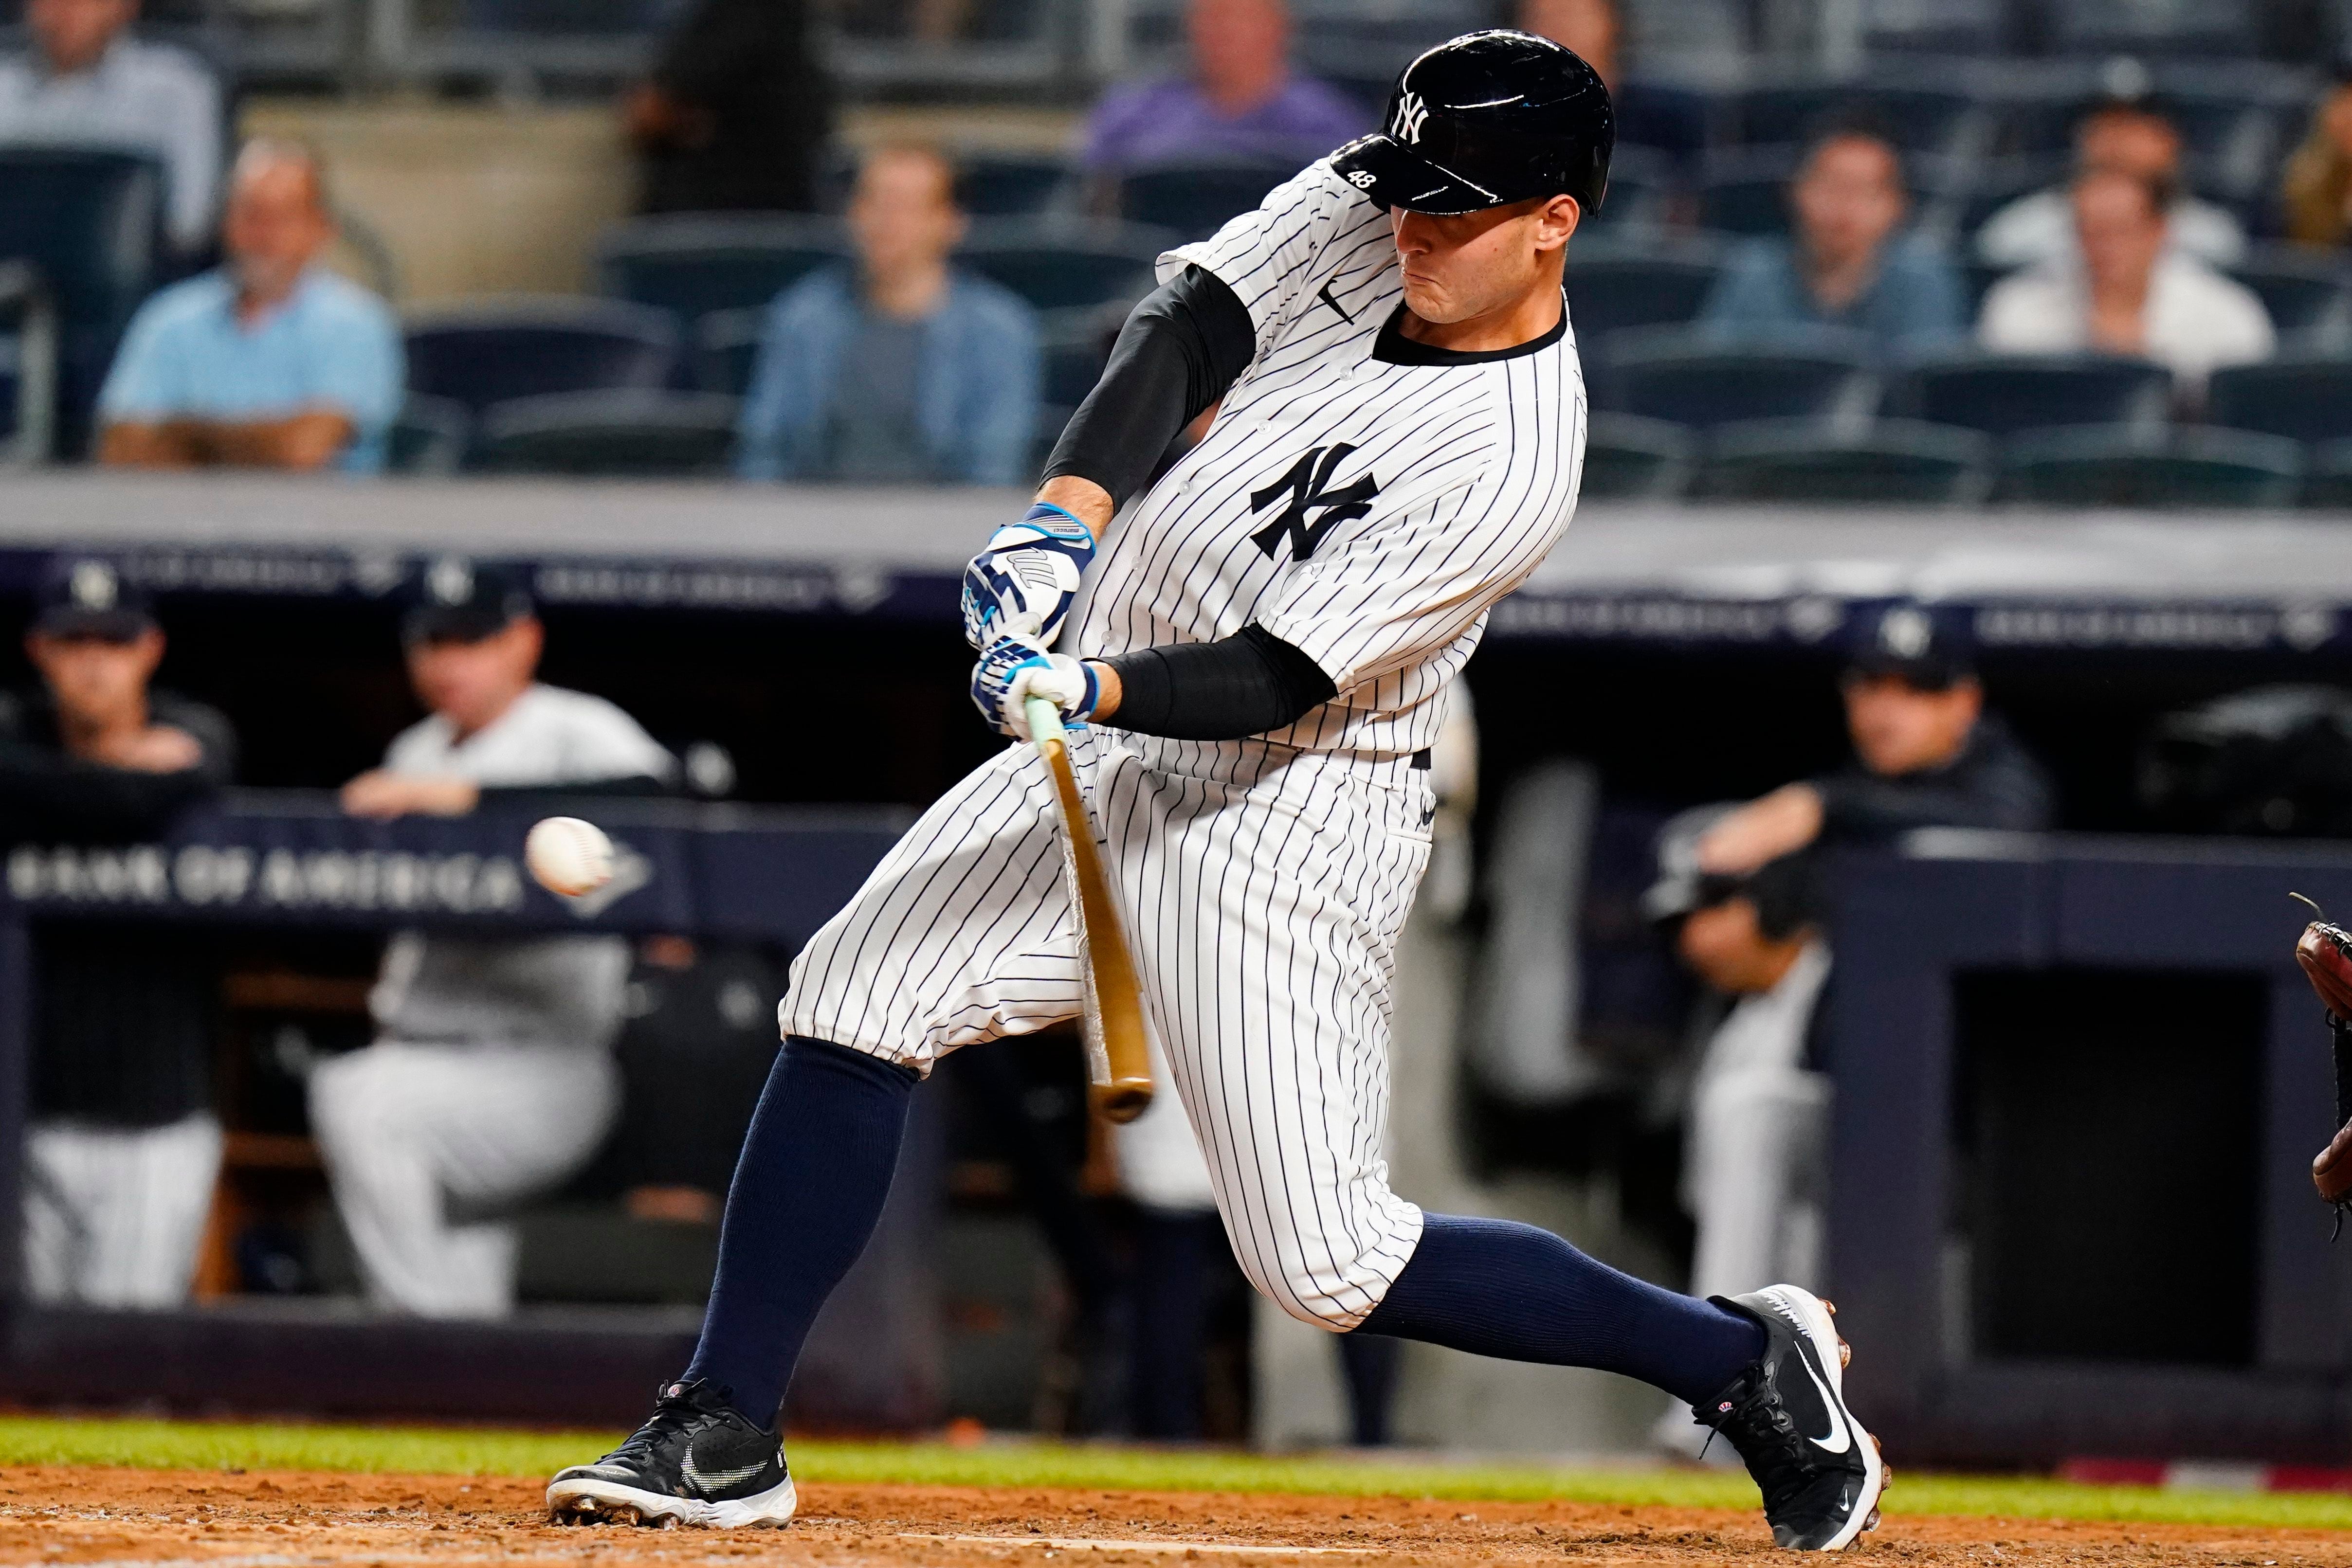 The Yankees' Painful Opening: 8 Games, 4 Losses, and an $87